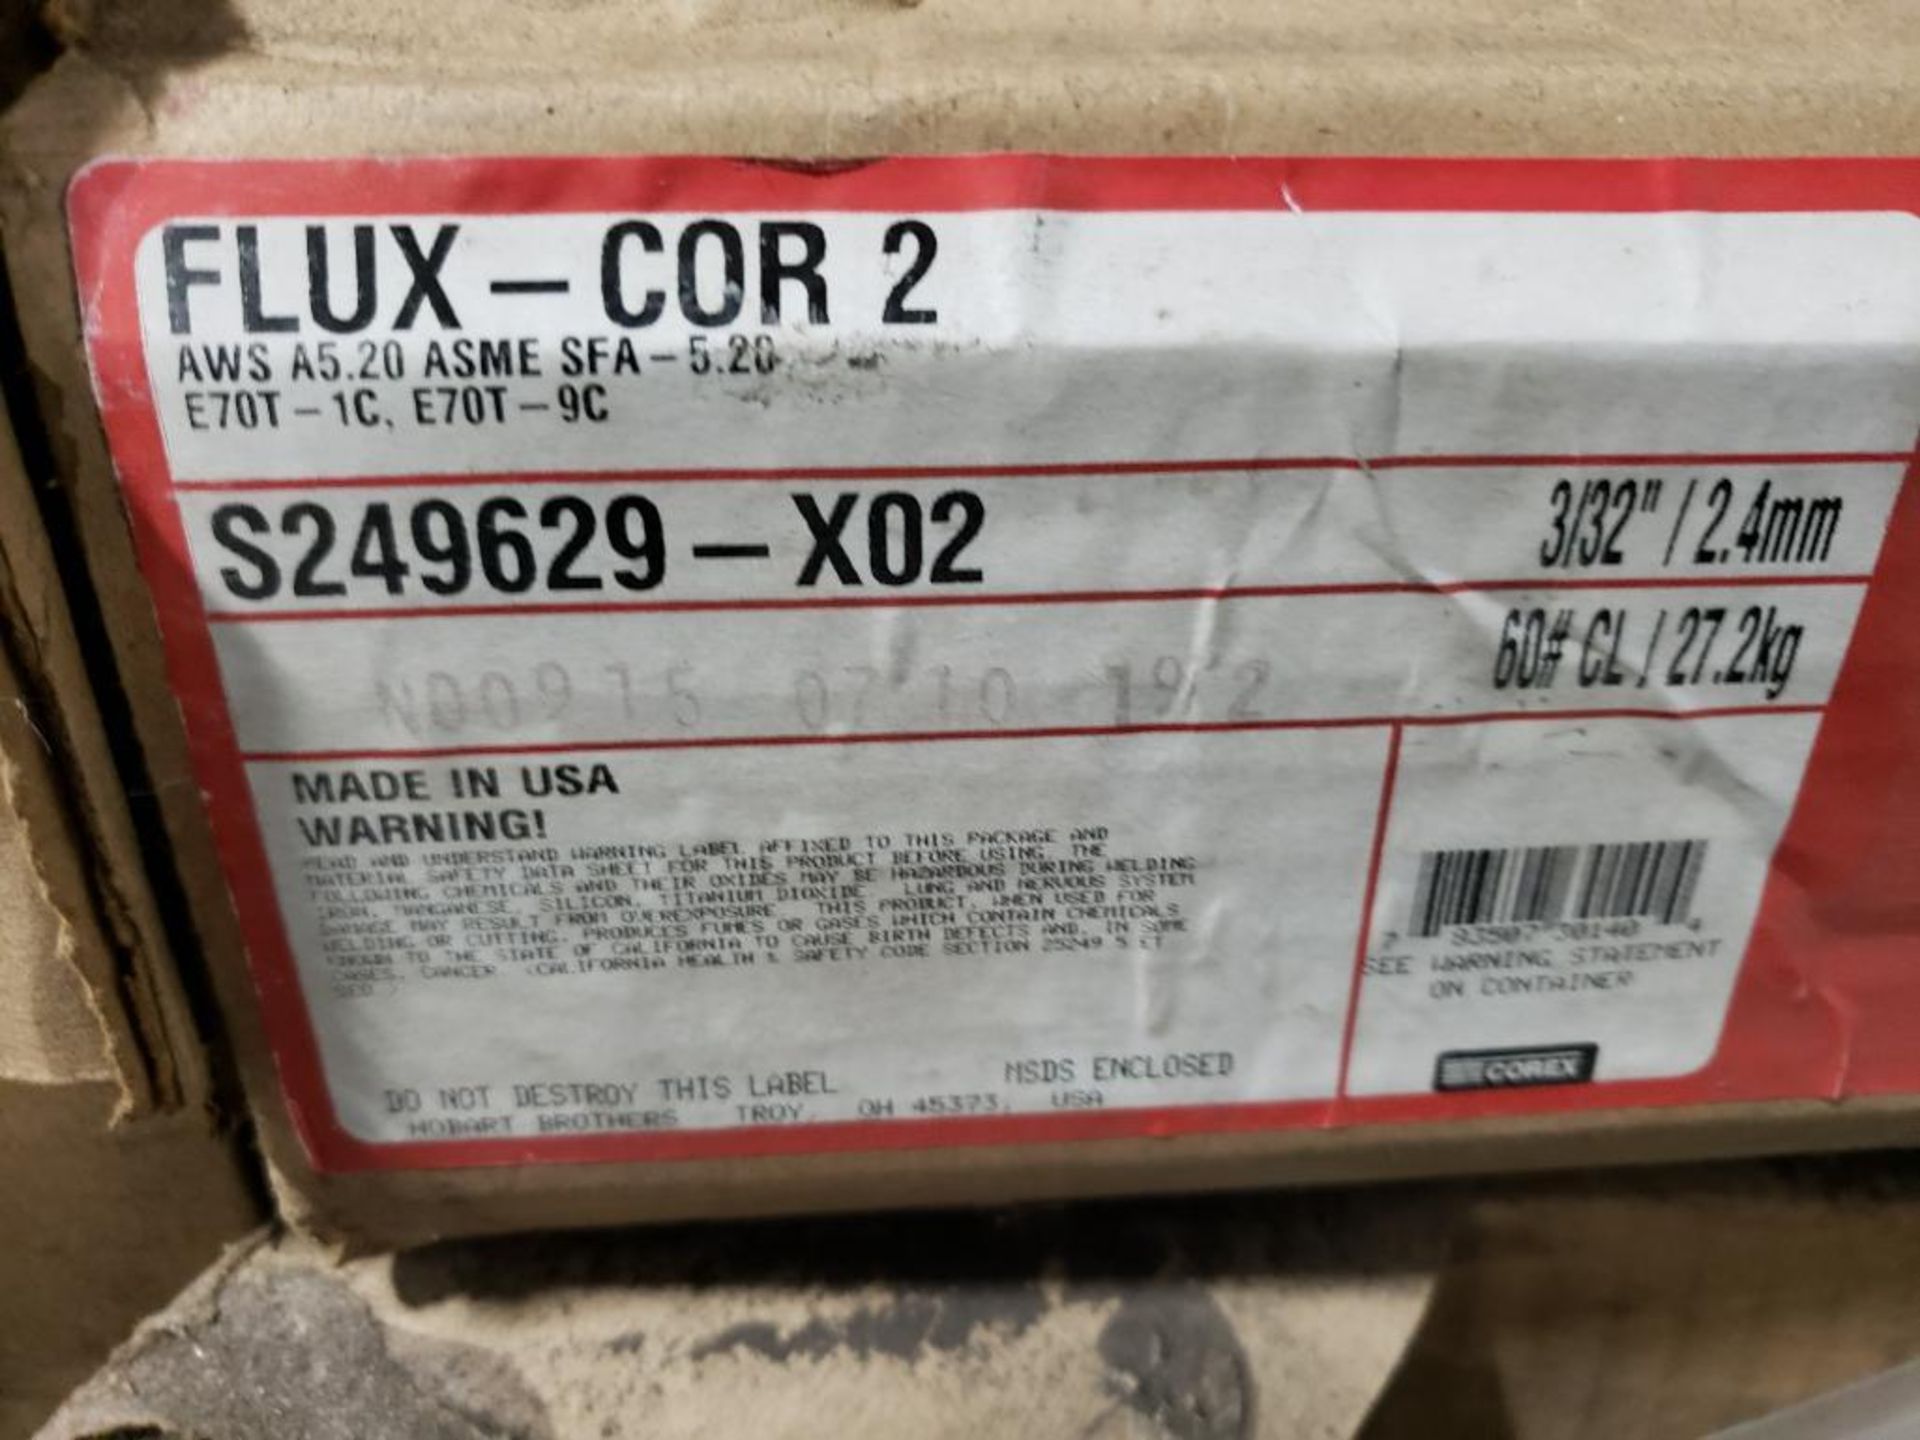 Qty 960lbs - Corex welding wire. Flux-Cor 2, 3/32in. Part number S249629-X02. (16 rolls of 60lbs ea) - Image 3 of 4